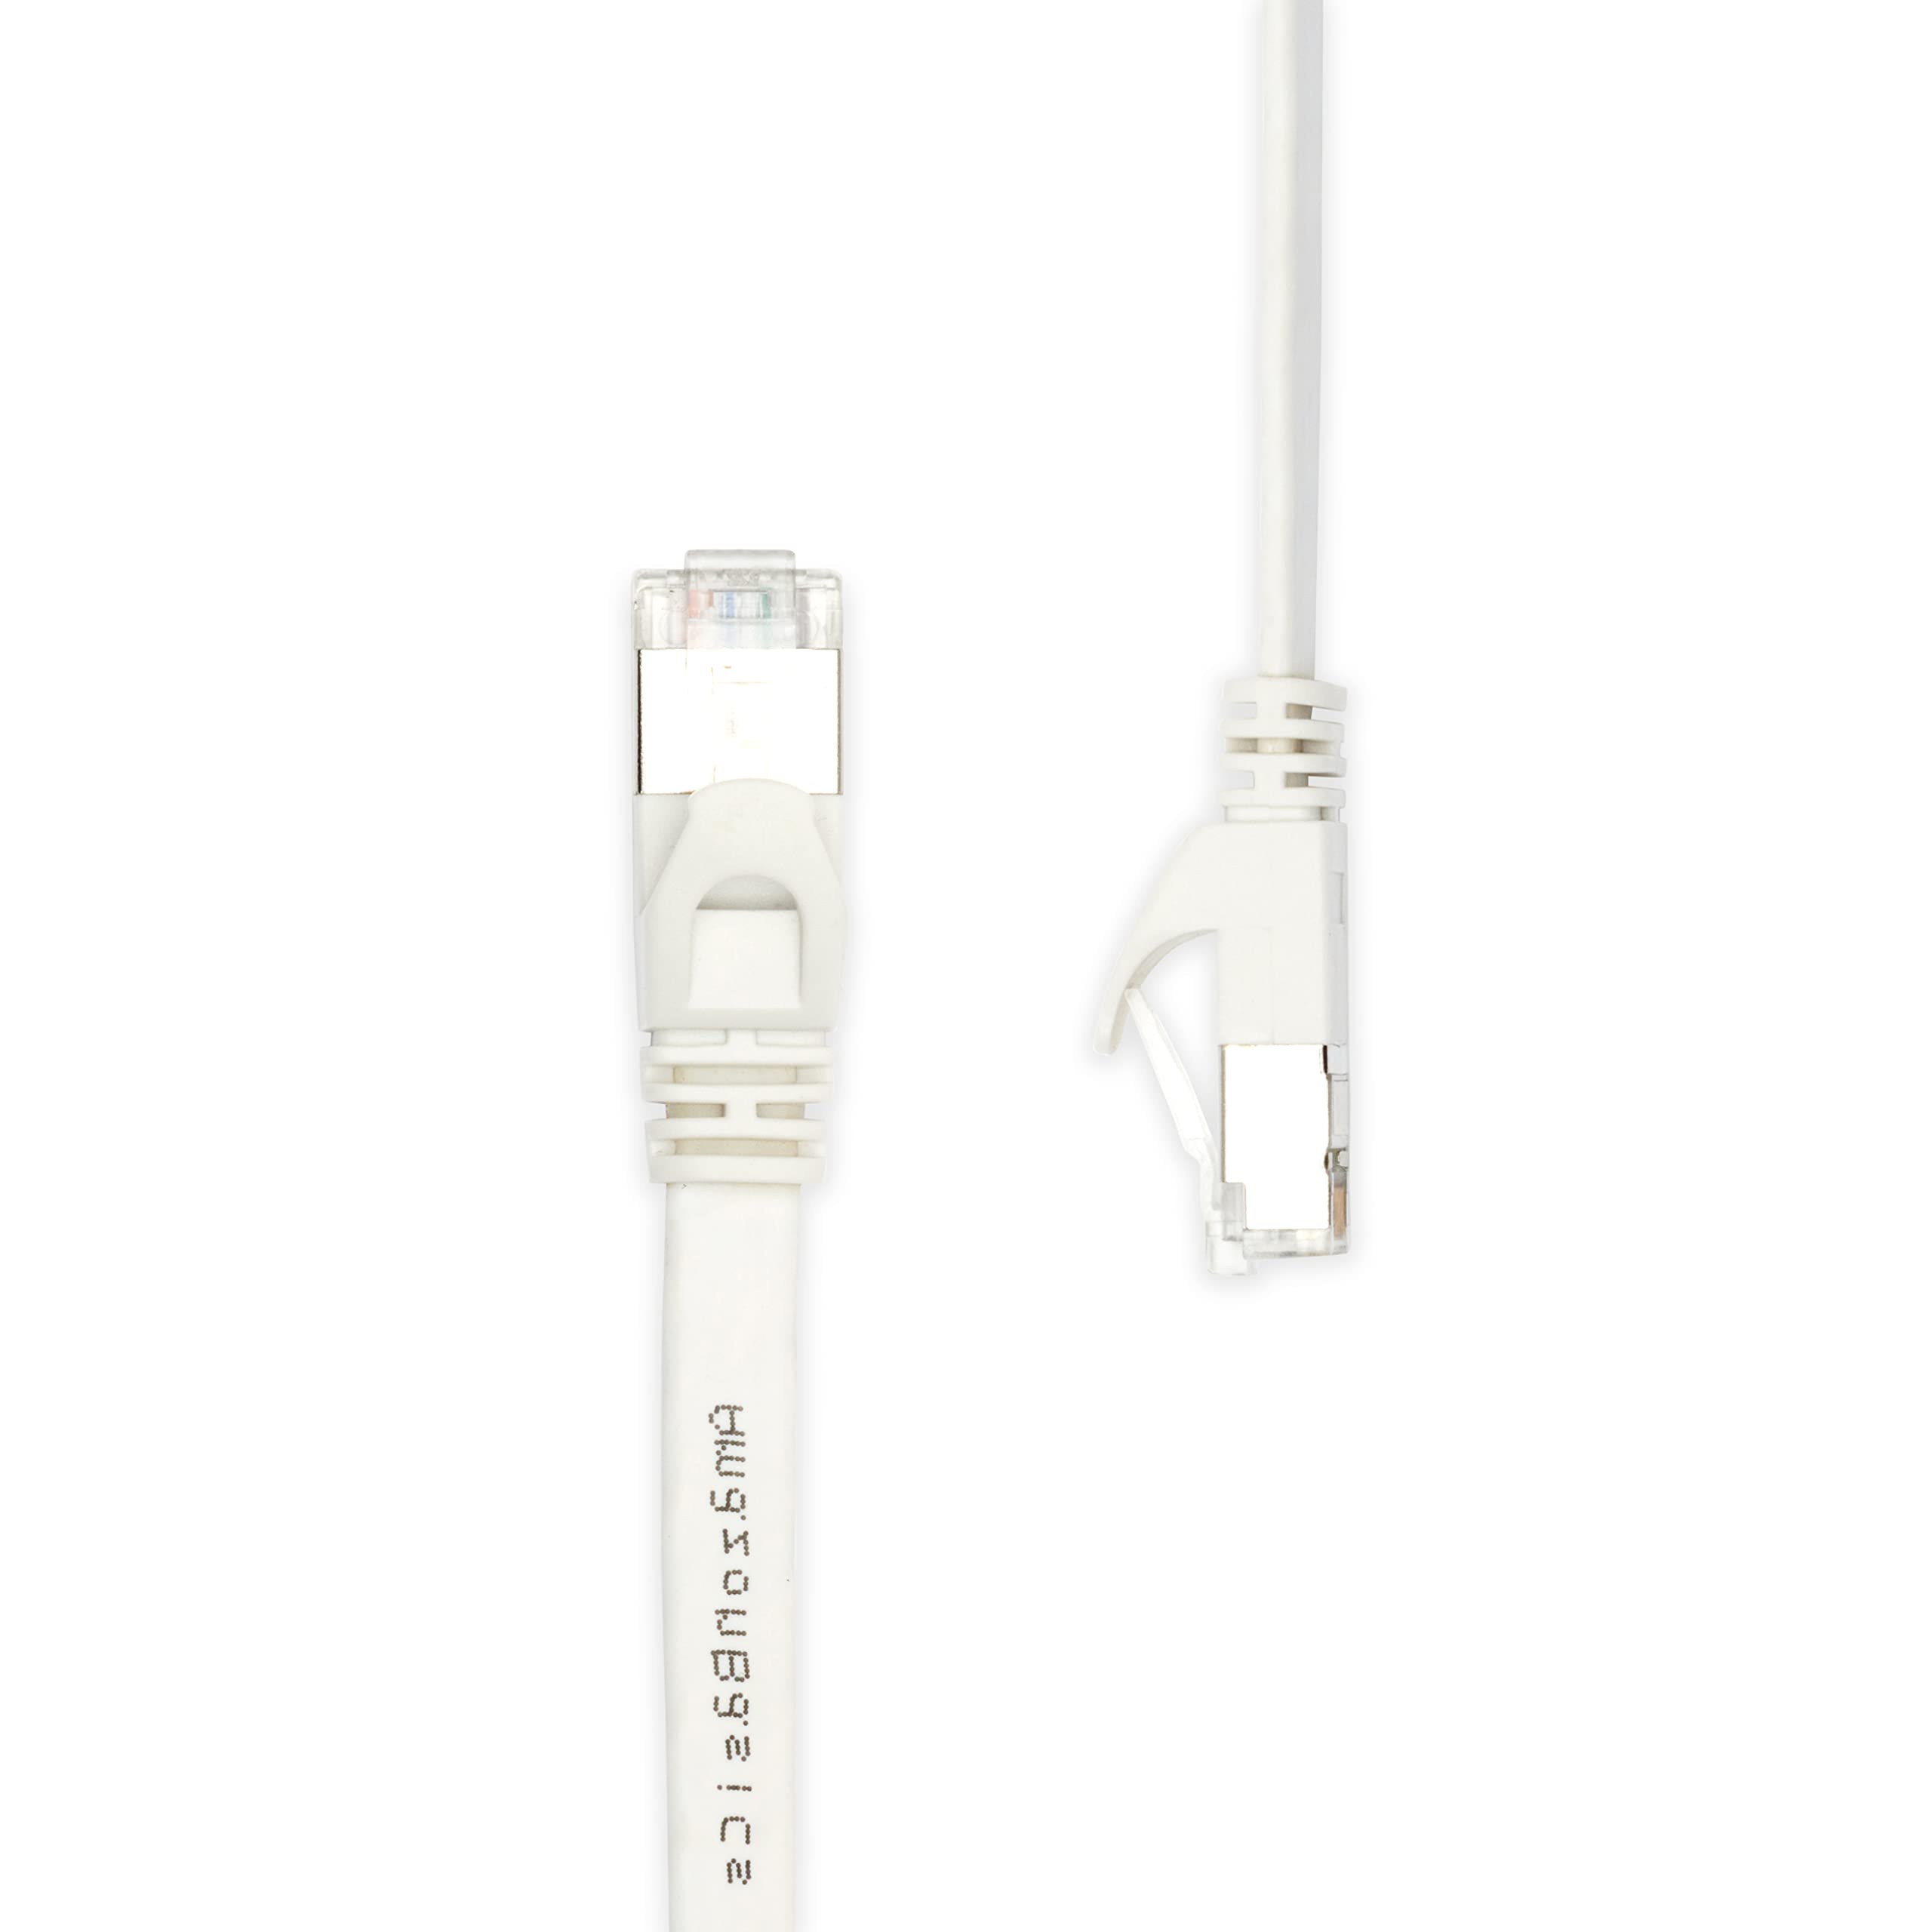 Amazon Basics RJ45 Cat 7 Ethernet Patch Cable, Flat, 600MHz, Snagless, Includes 20 Nails, 50 Foot, White